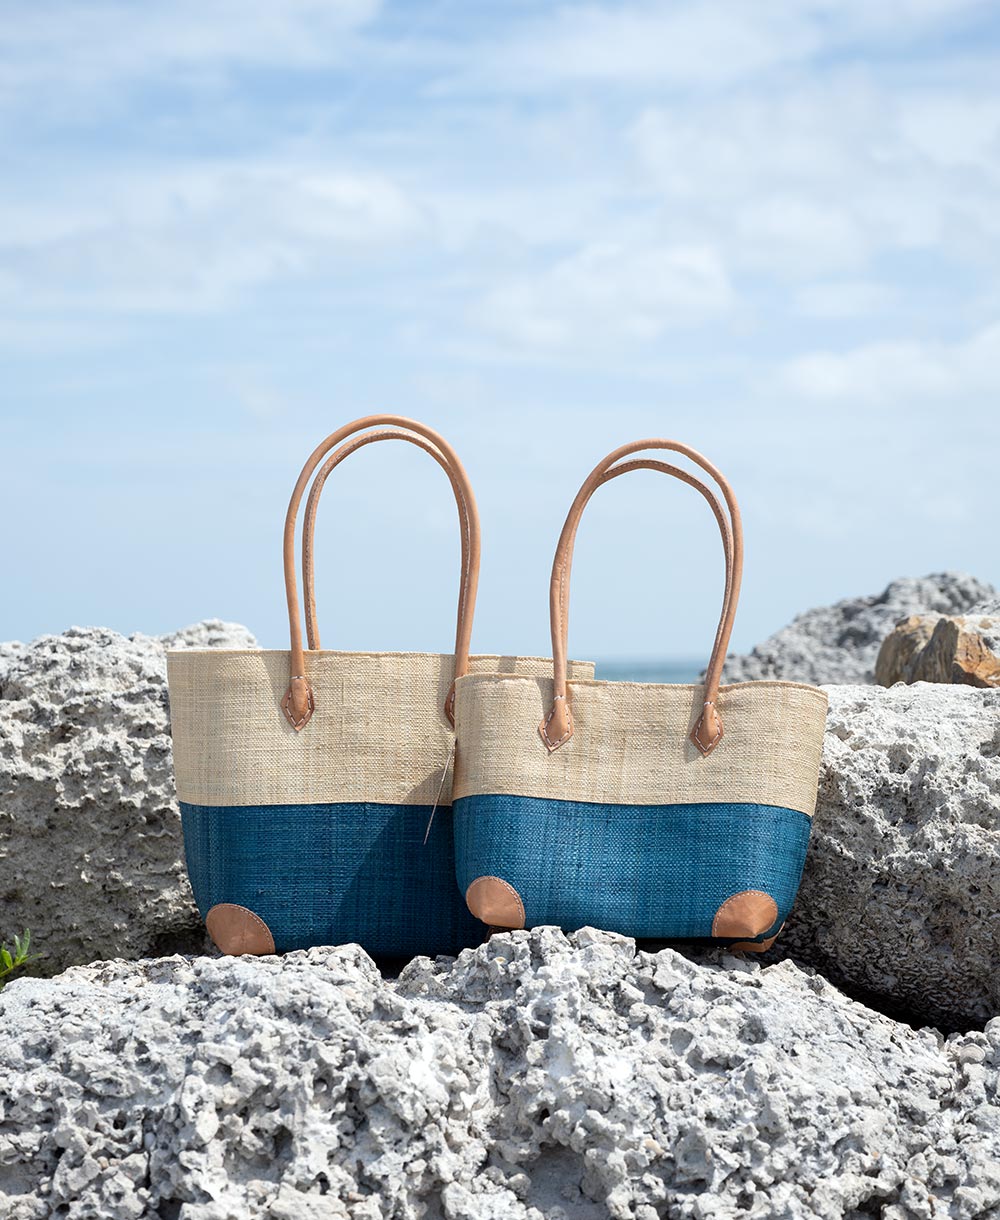 Perfect Pairing of the Shebobo Trinidad Two Tone Tote Bag in the color aqua in sizes small & medium at the beach on rocks